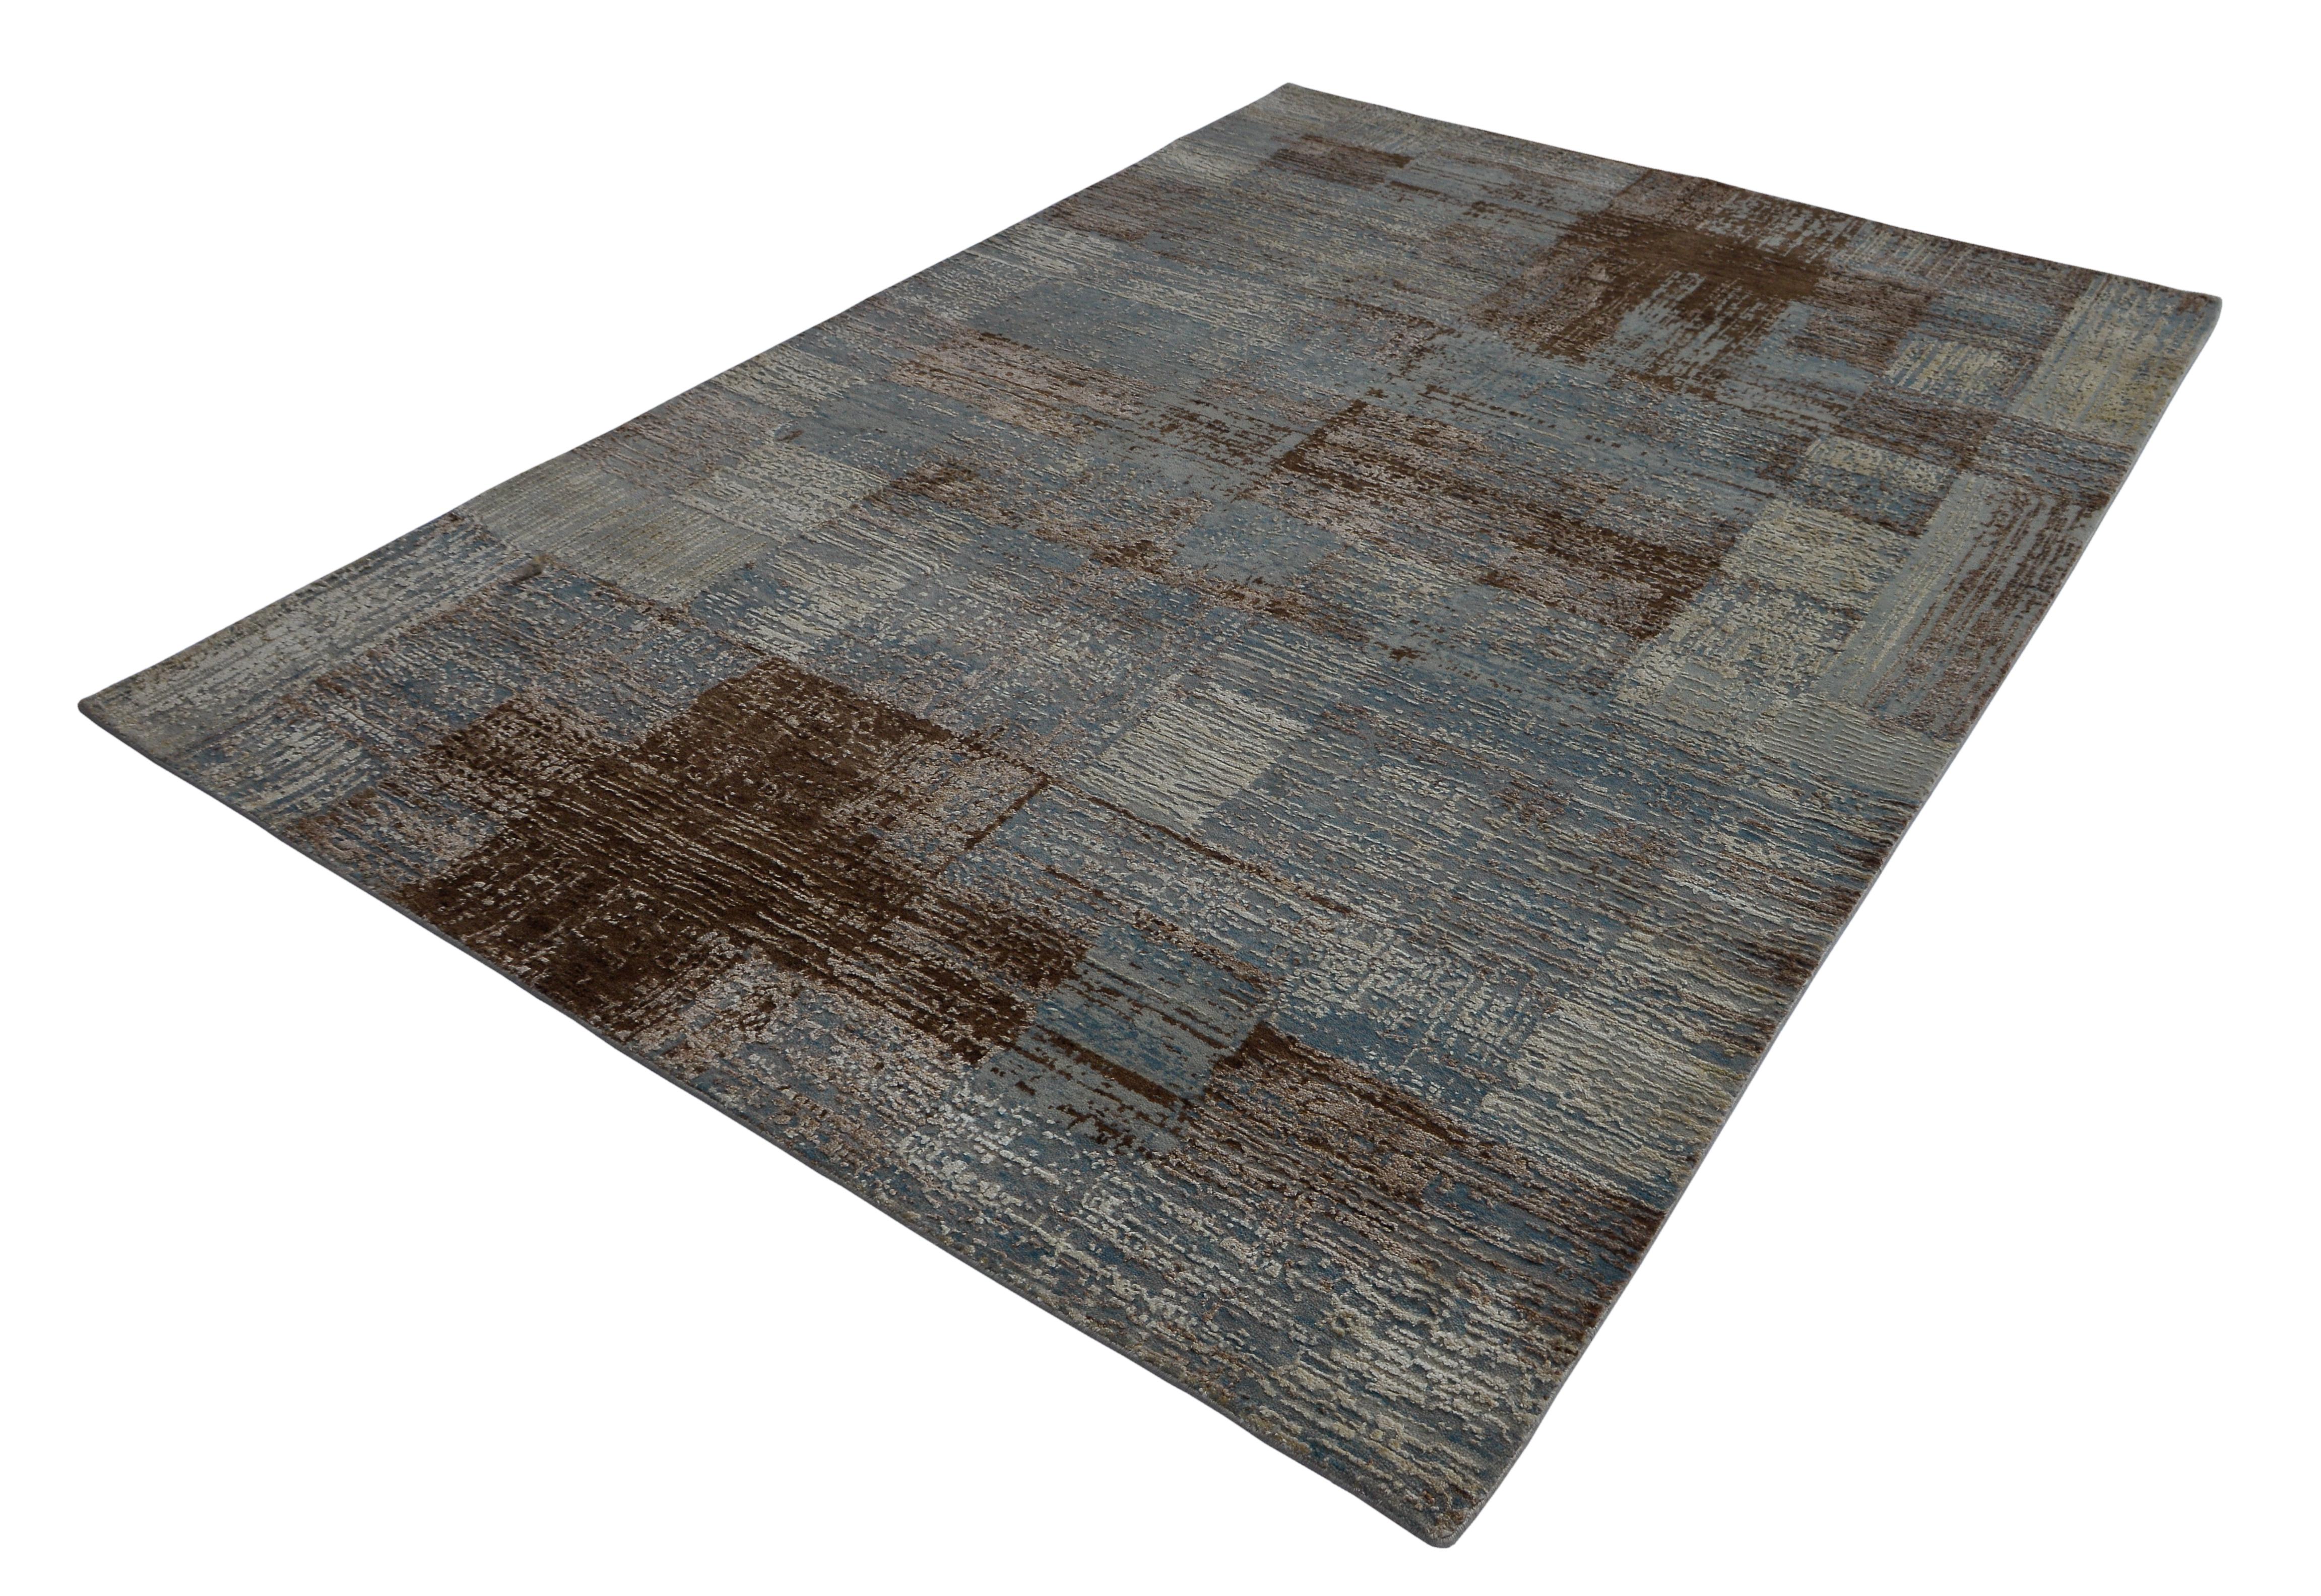 A new addition to the handmade rugs in the abstract rug line by Rug & Kilim, this 5'9” x 8'2” modern rug is hand knotted in a unique, proprietary blend of quality wool and silk, the natural luster of the latter bringing out transitional hues of